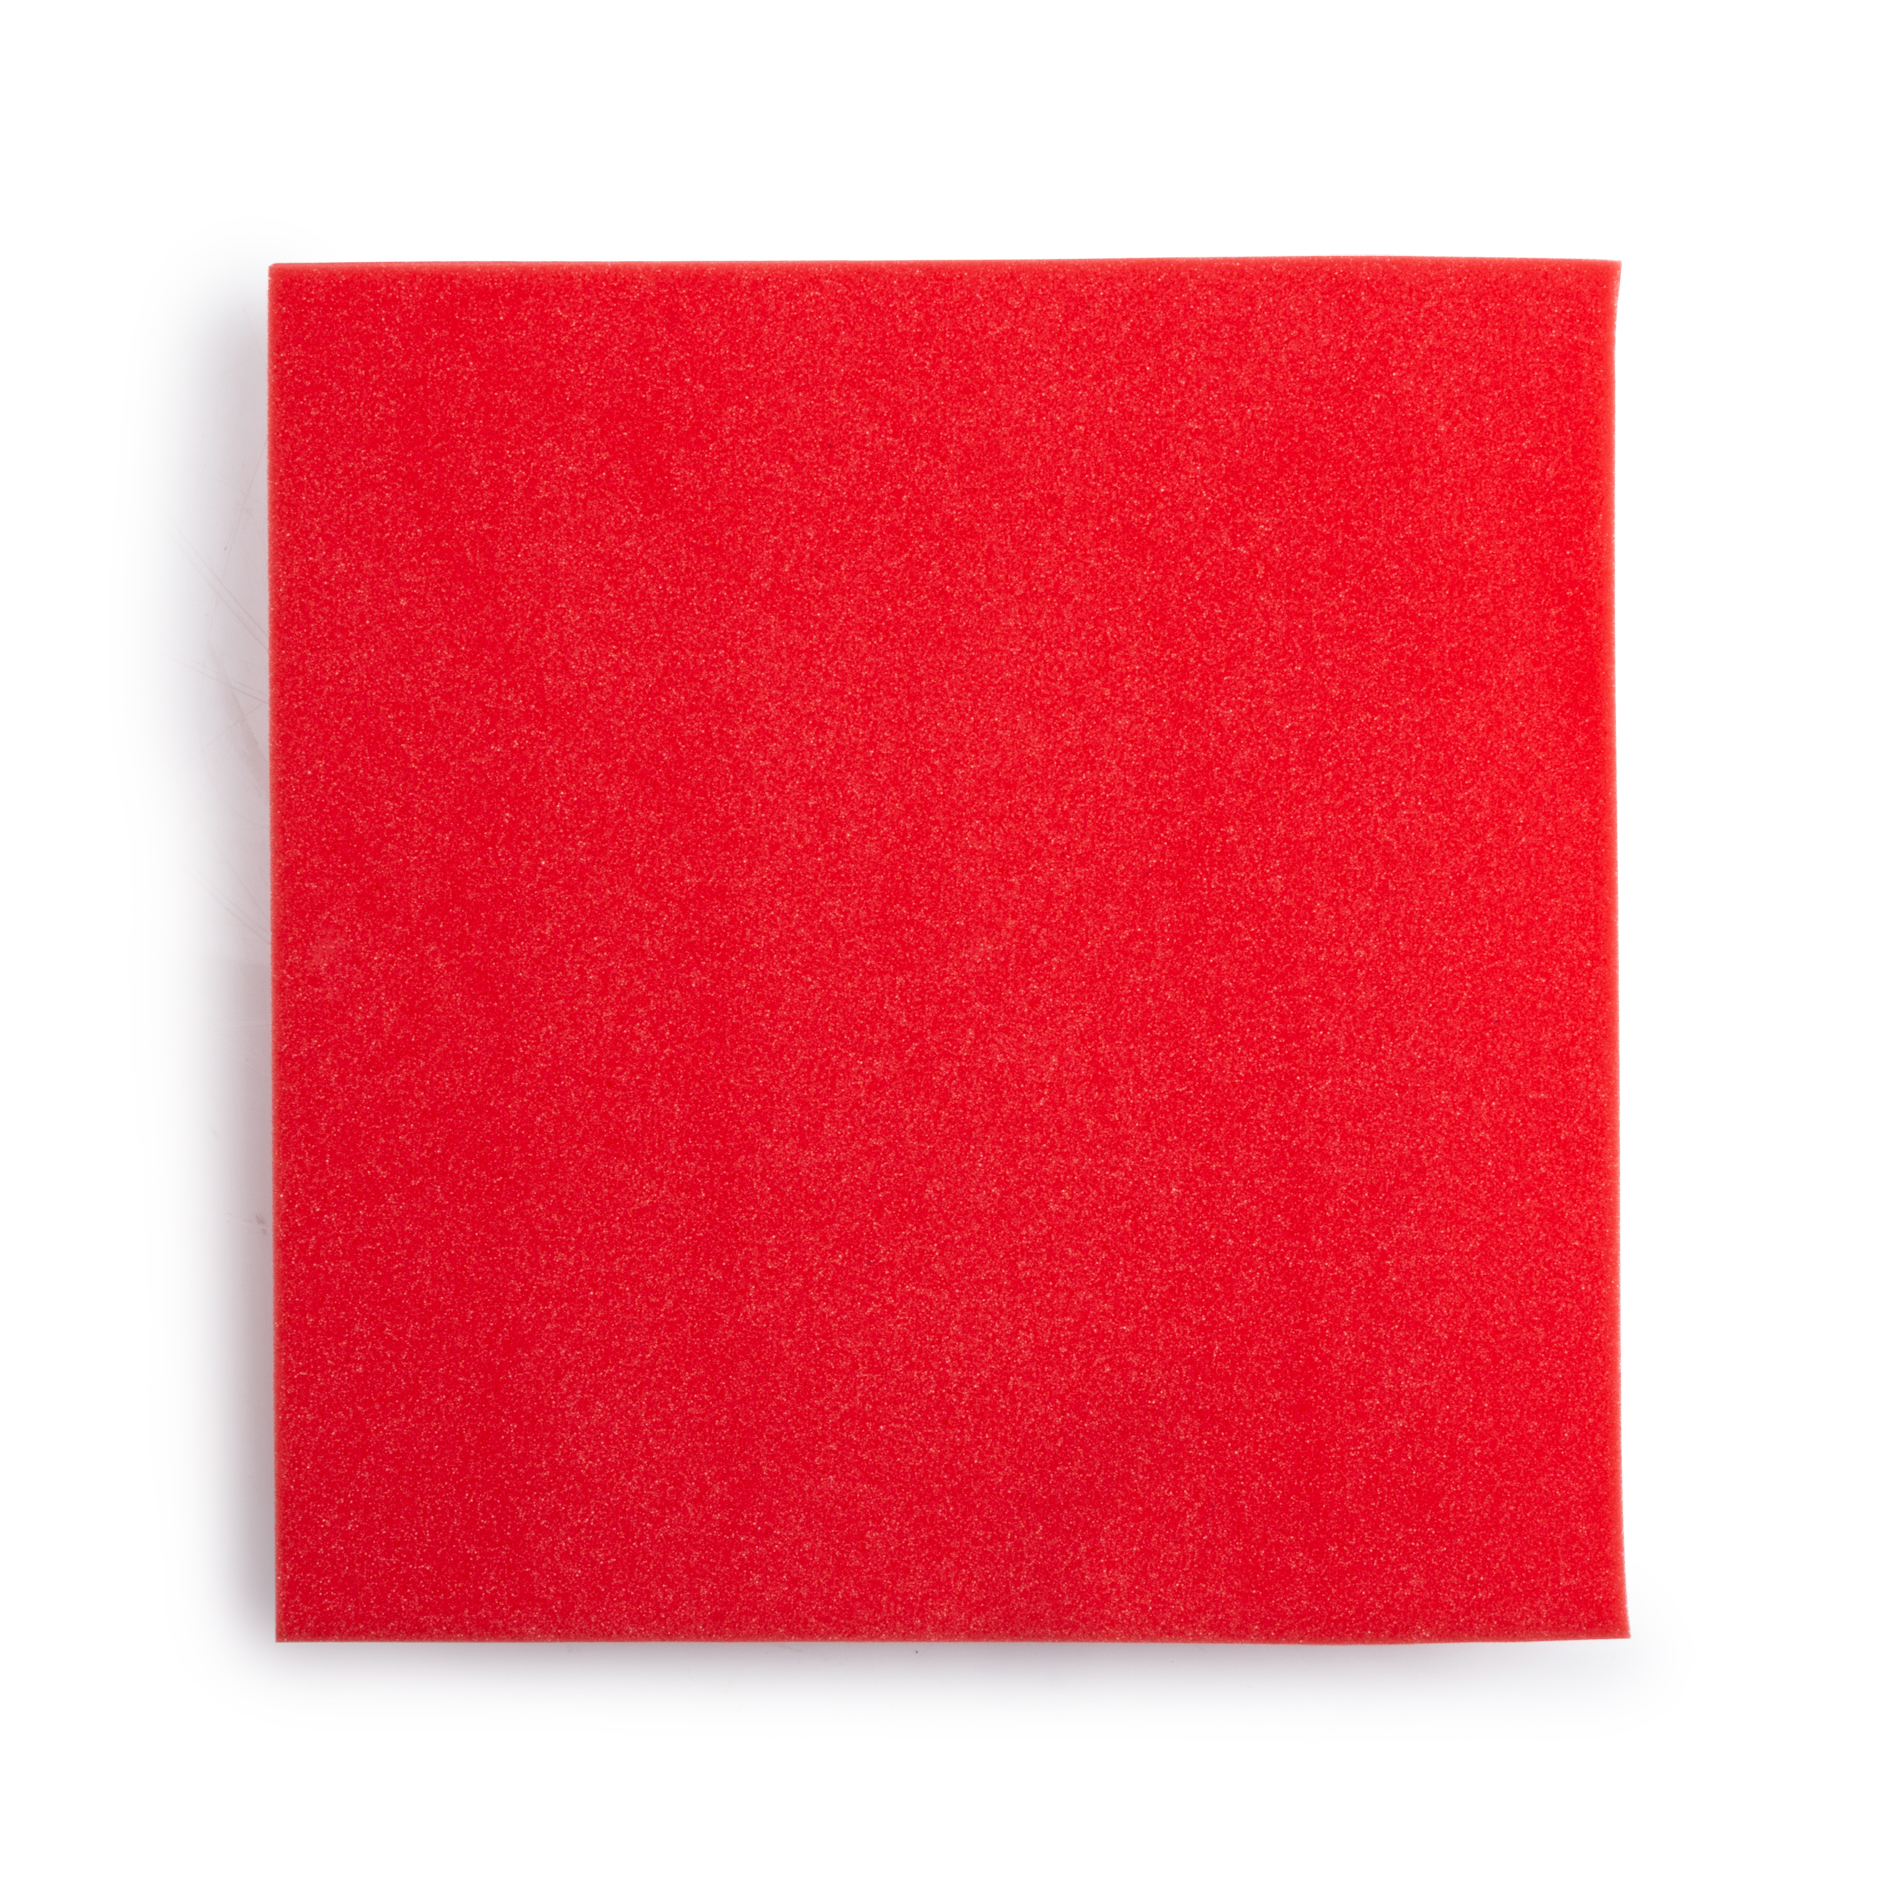 4 Pack of Red 12×12″ Acoustic Pyramid Panel-GFW-ACPNL1212PRED-4PK